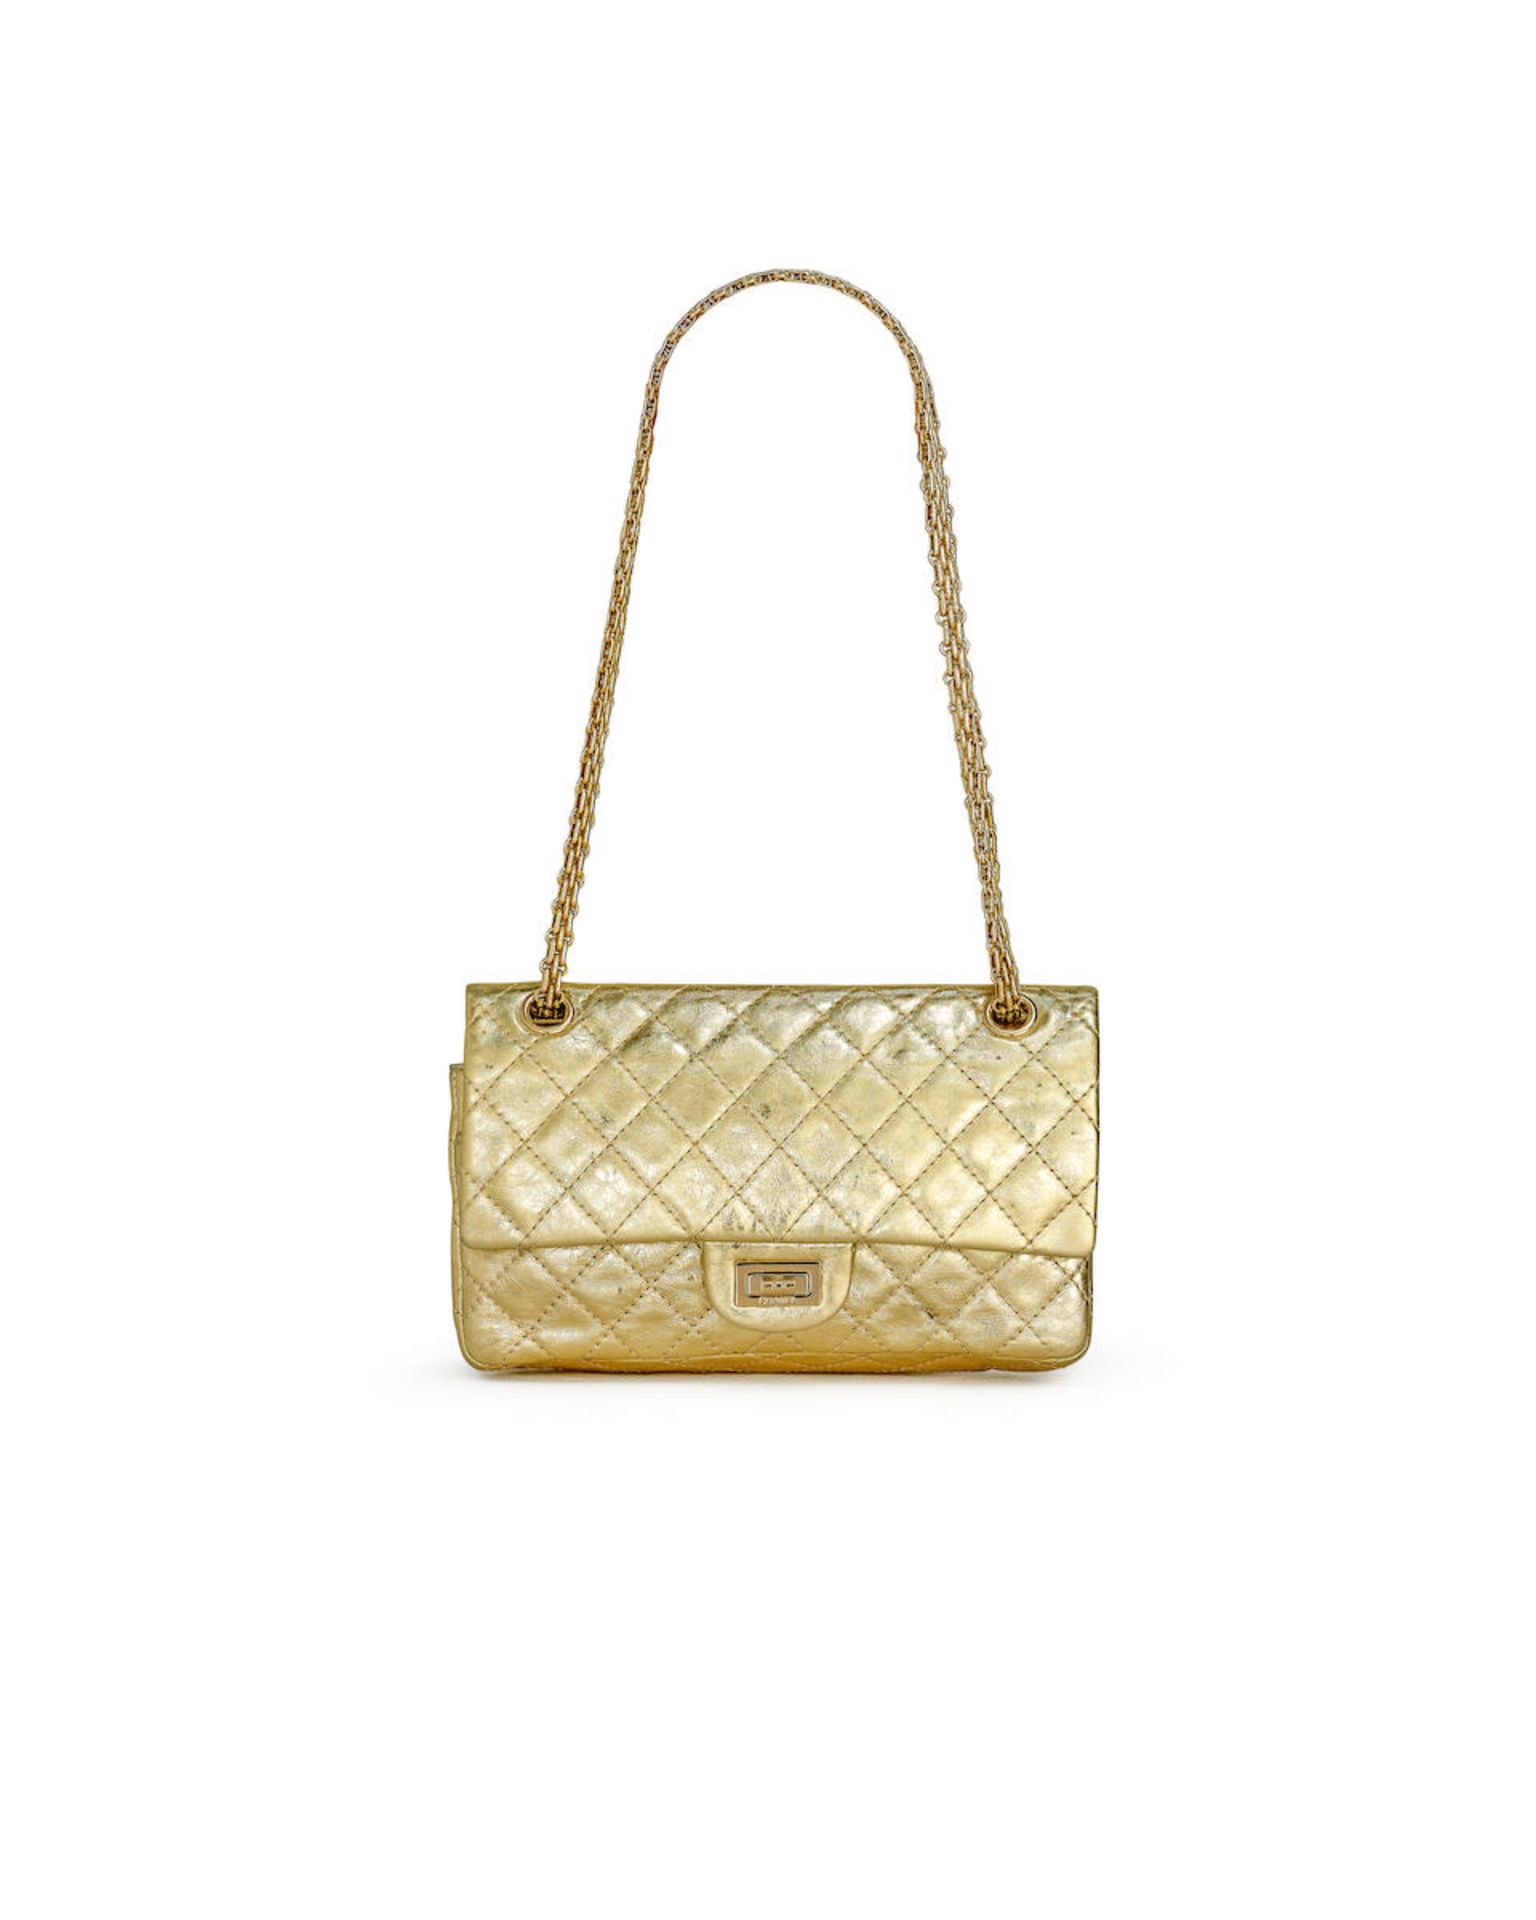 CHANEL: METALLIC GOLD 2.55 MEDIUM CLASSIC FLAP WITH GOLD TONED HARDWARE (Includes serial sticker...